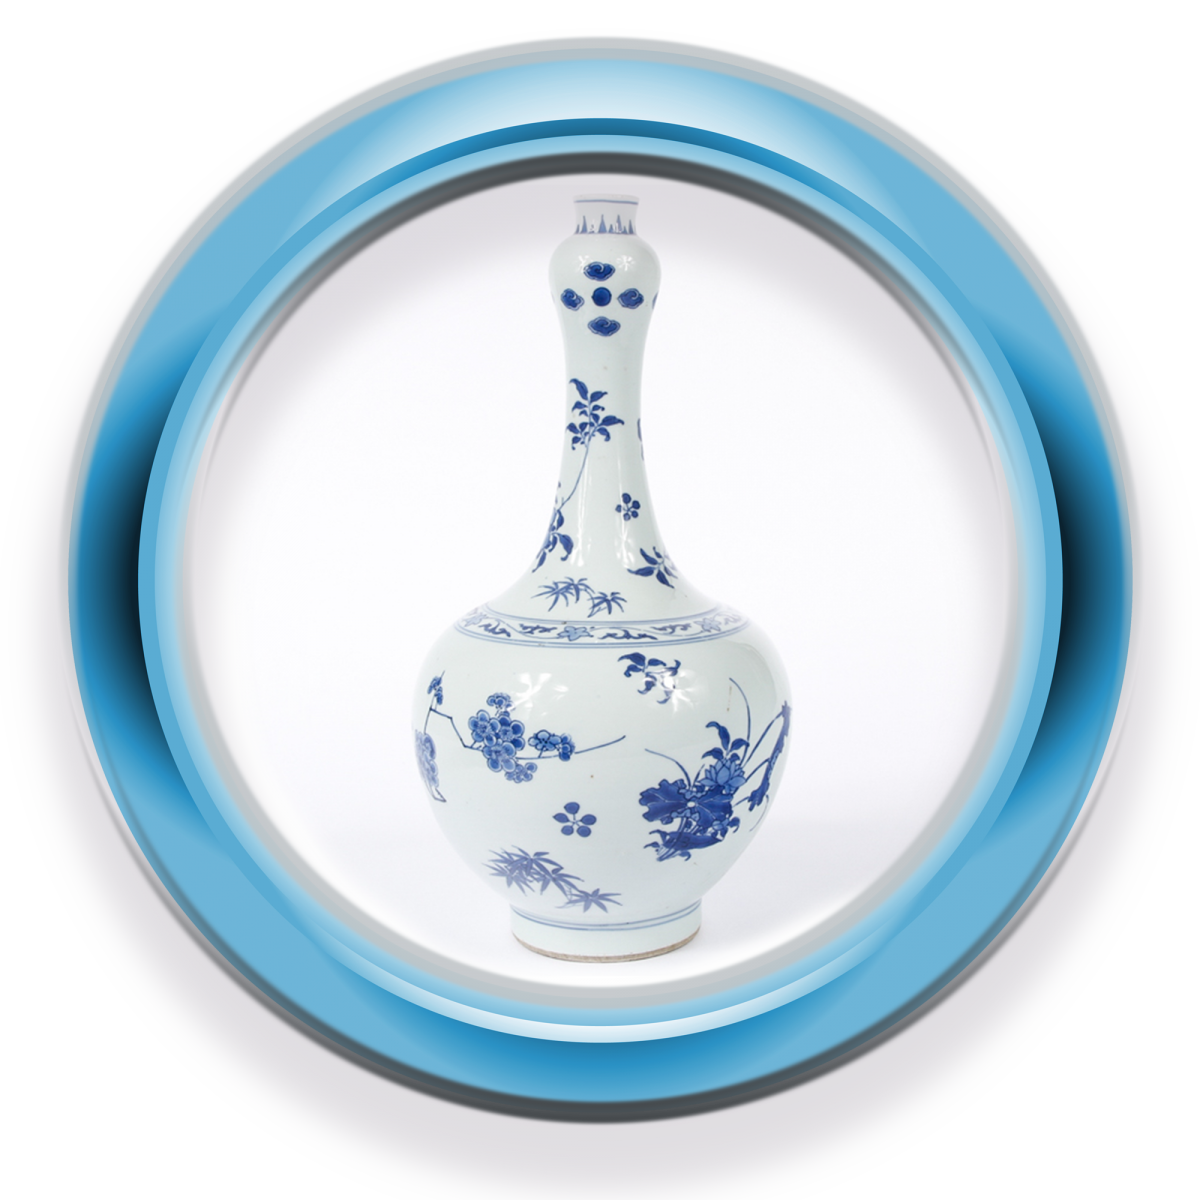 CHINESE BLUE AND WHITE PORCELAIN VASE, CIRCA 1640